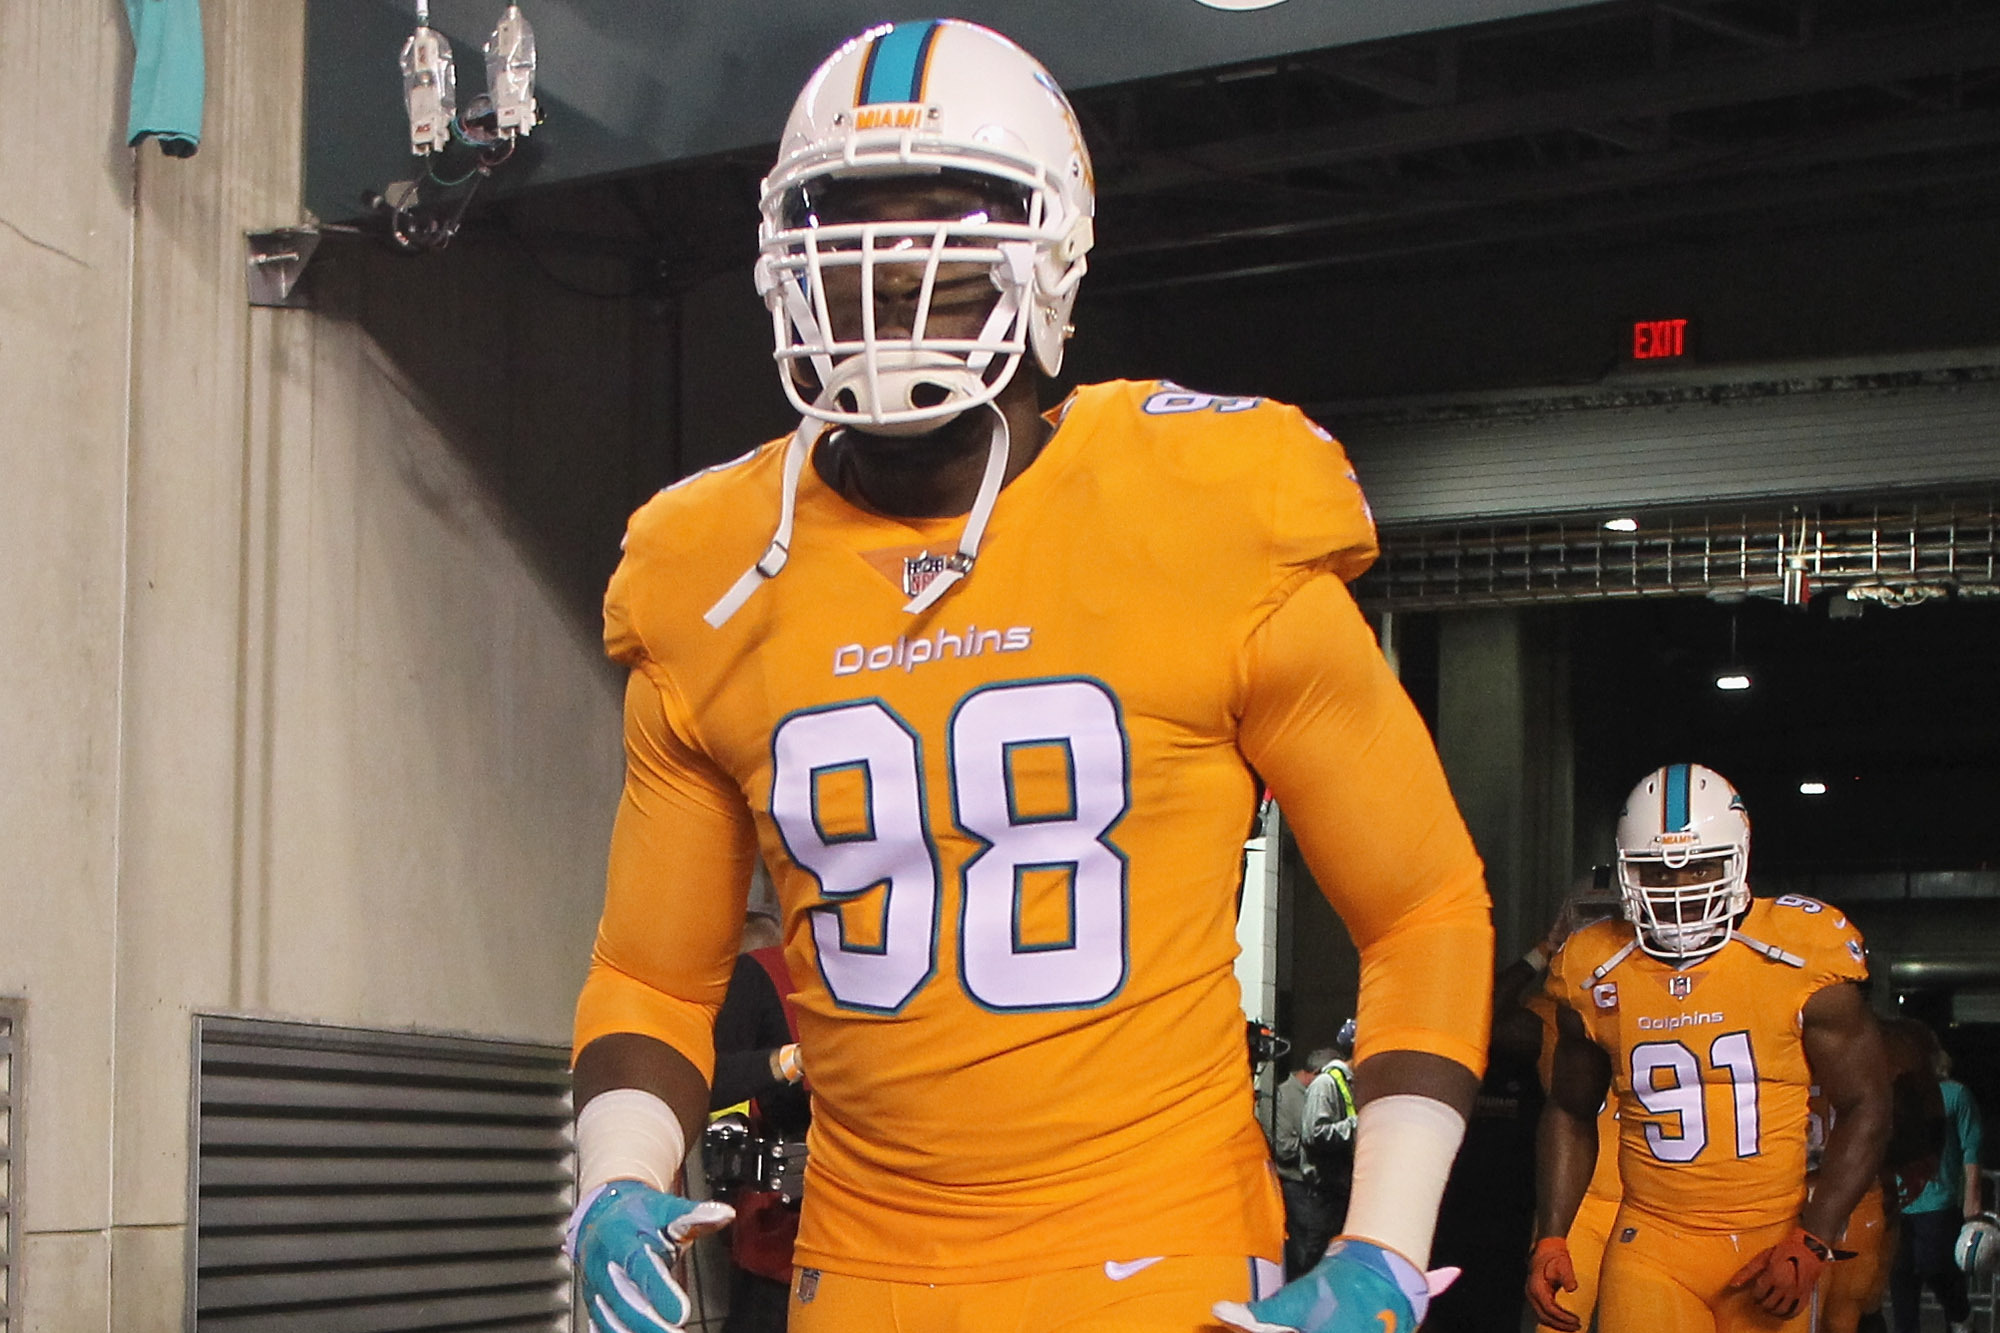 miami dolphins color rush jersey